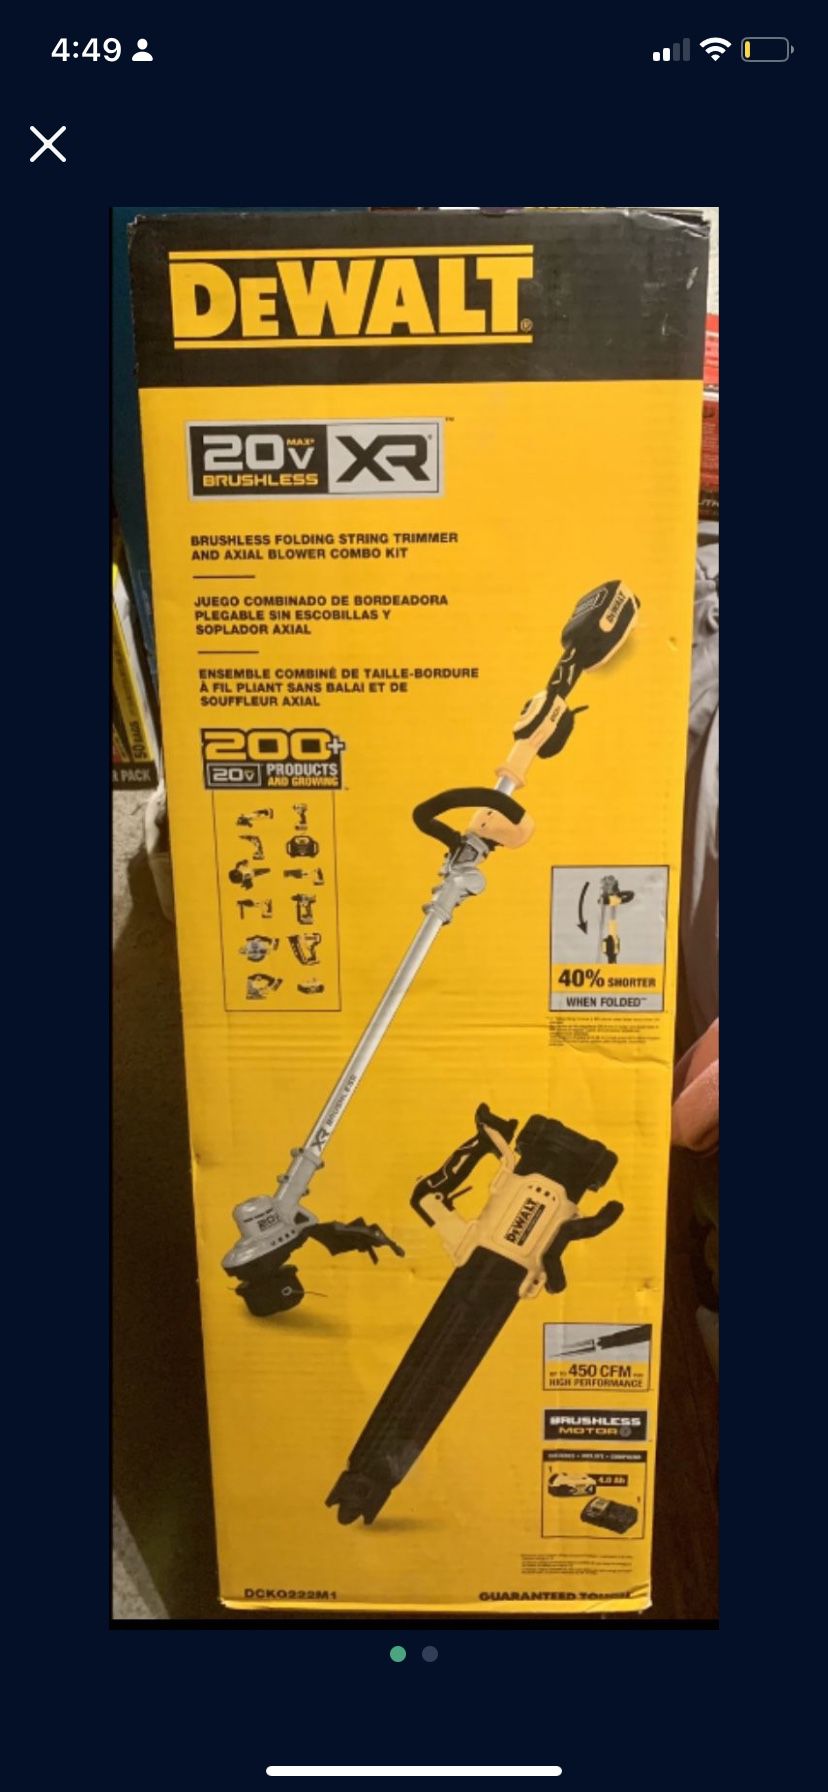 DEWALT 20V MAX Cordless Battery Powered String Trimmer & Leaf Blower Combo Kit with (1) 4.0 Ah Battery and Charger